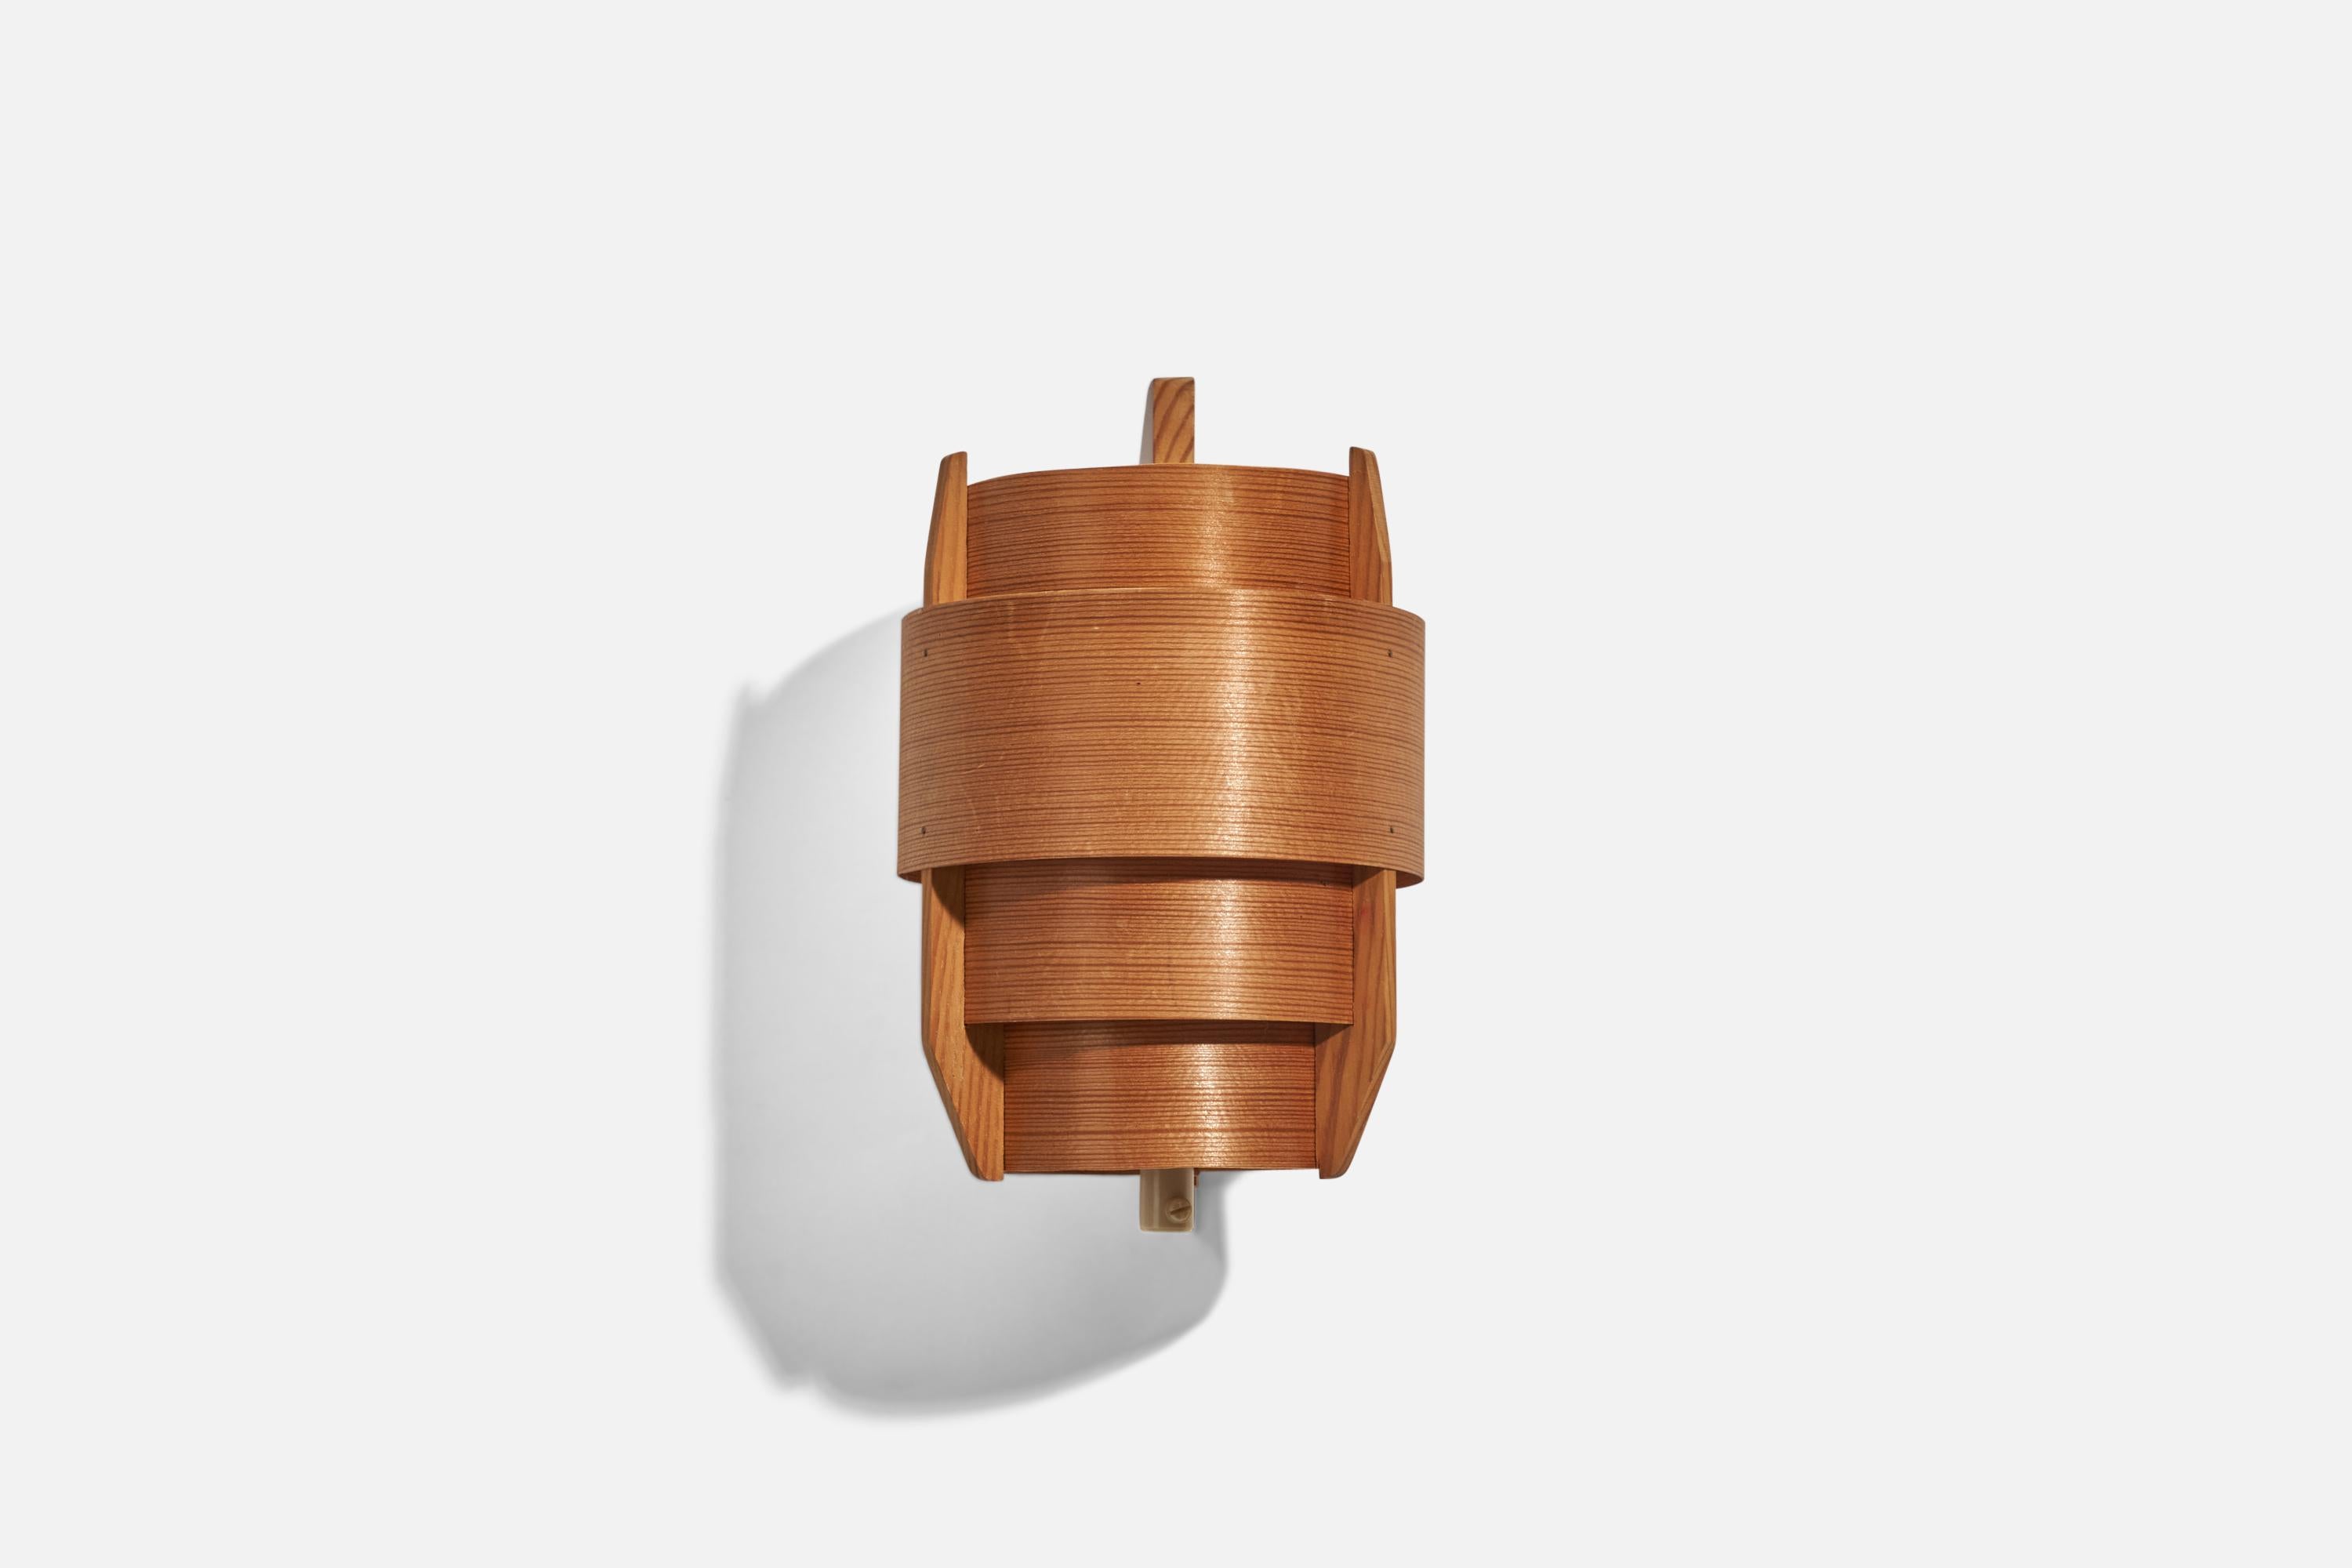 A pine and moulded pine veneer sconce designed and produced by Hans-Agne Jakobsson, Sweden, 1970s.

Dimensions of Back Plate (inches) : 9.25 x 0.46 x 0.90 (Height x Width x Depth)

Socket takes standard E-26 medium base bulb.

The maximum